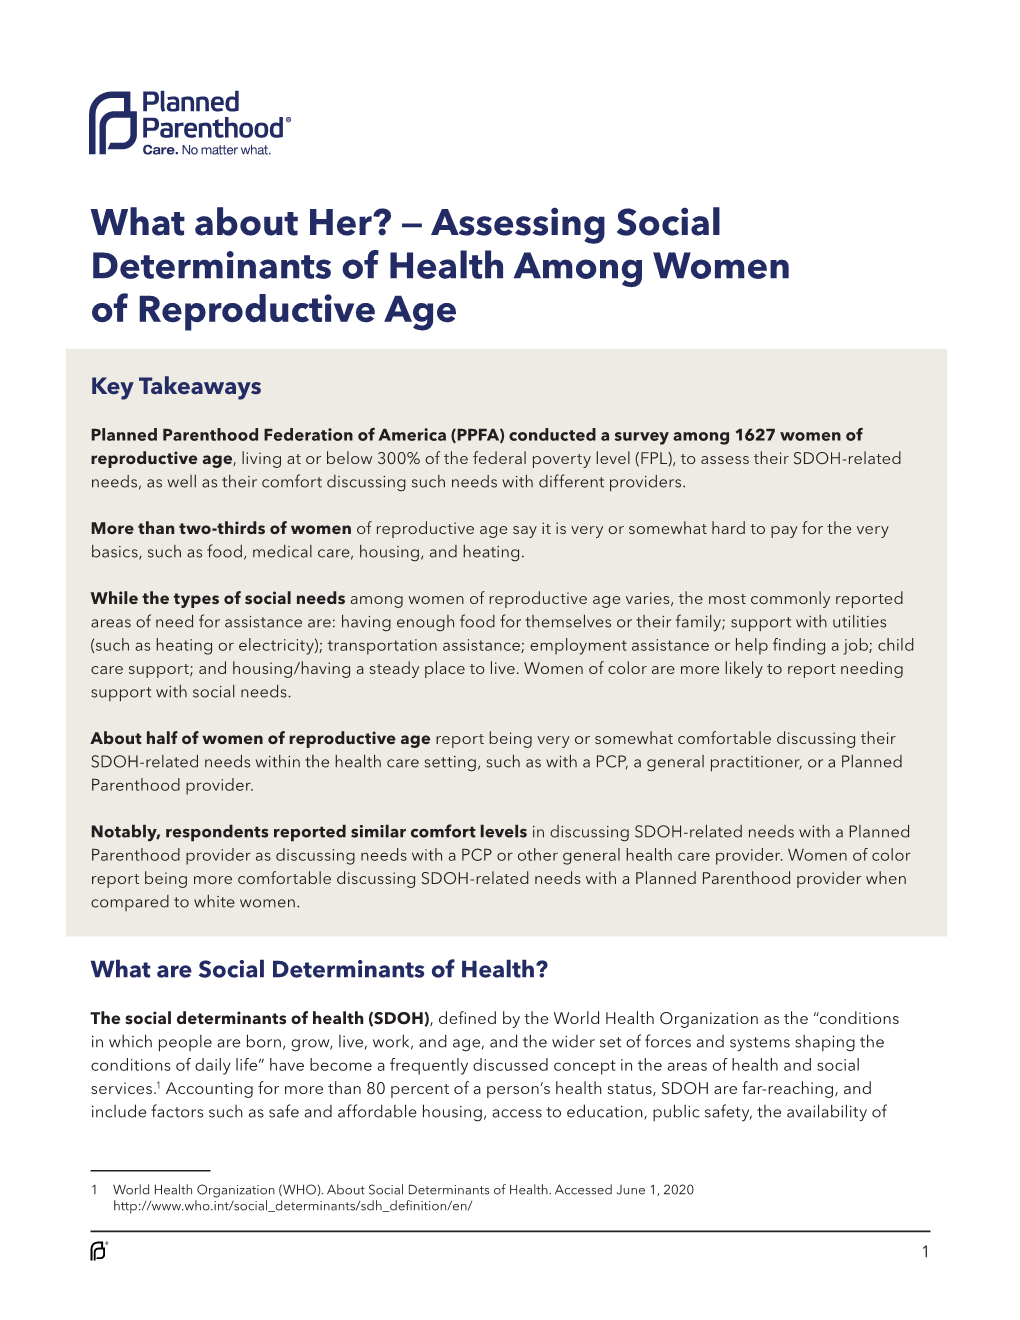 What About Her? — Assessing Social Determinants of Health Among Women of Reproductive Age